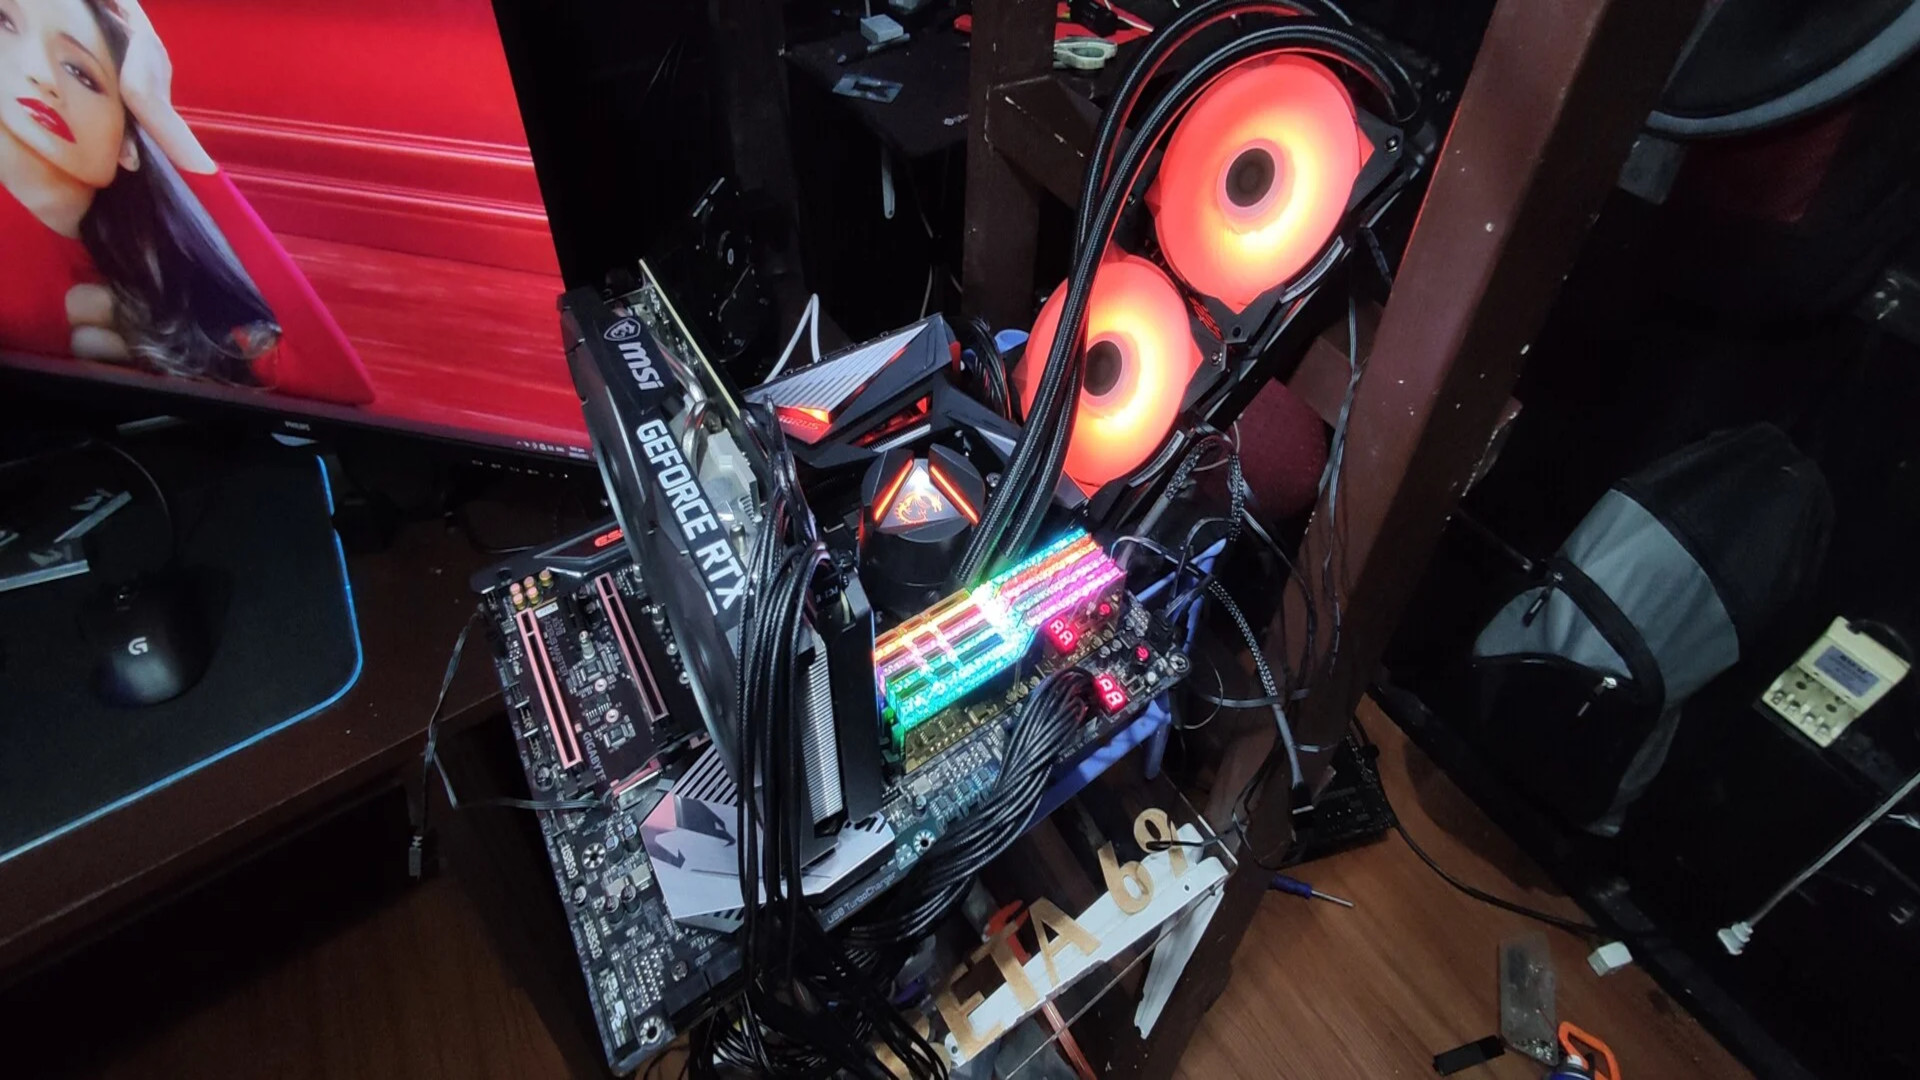 The internals of the Pochita gaming PC build